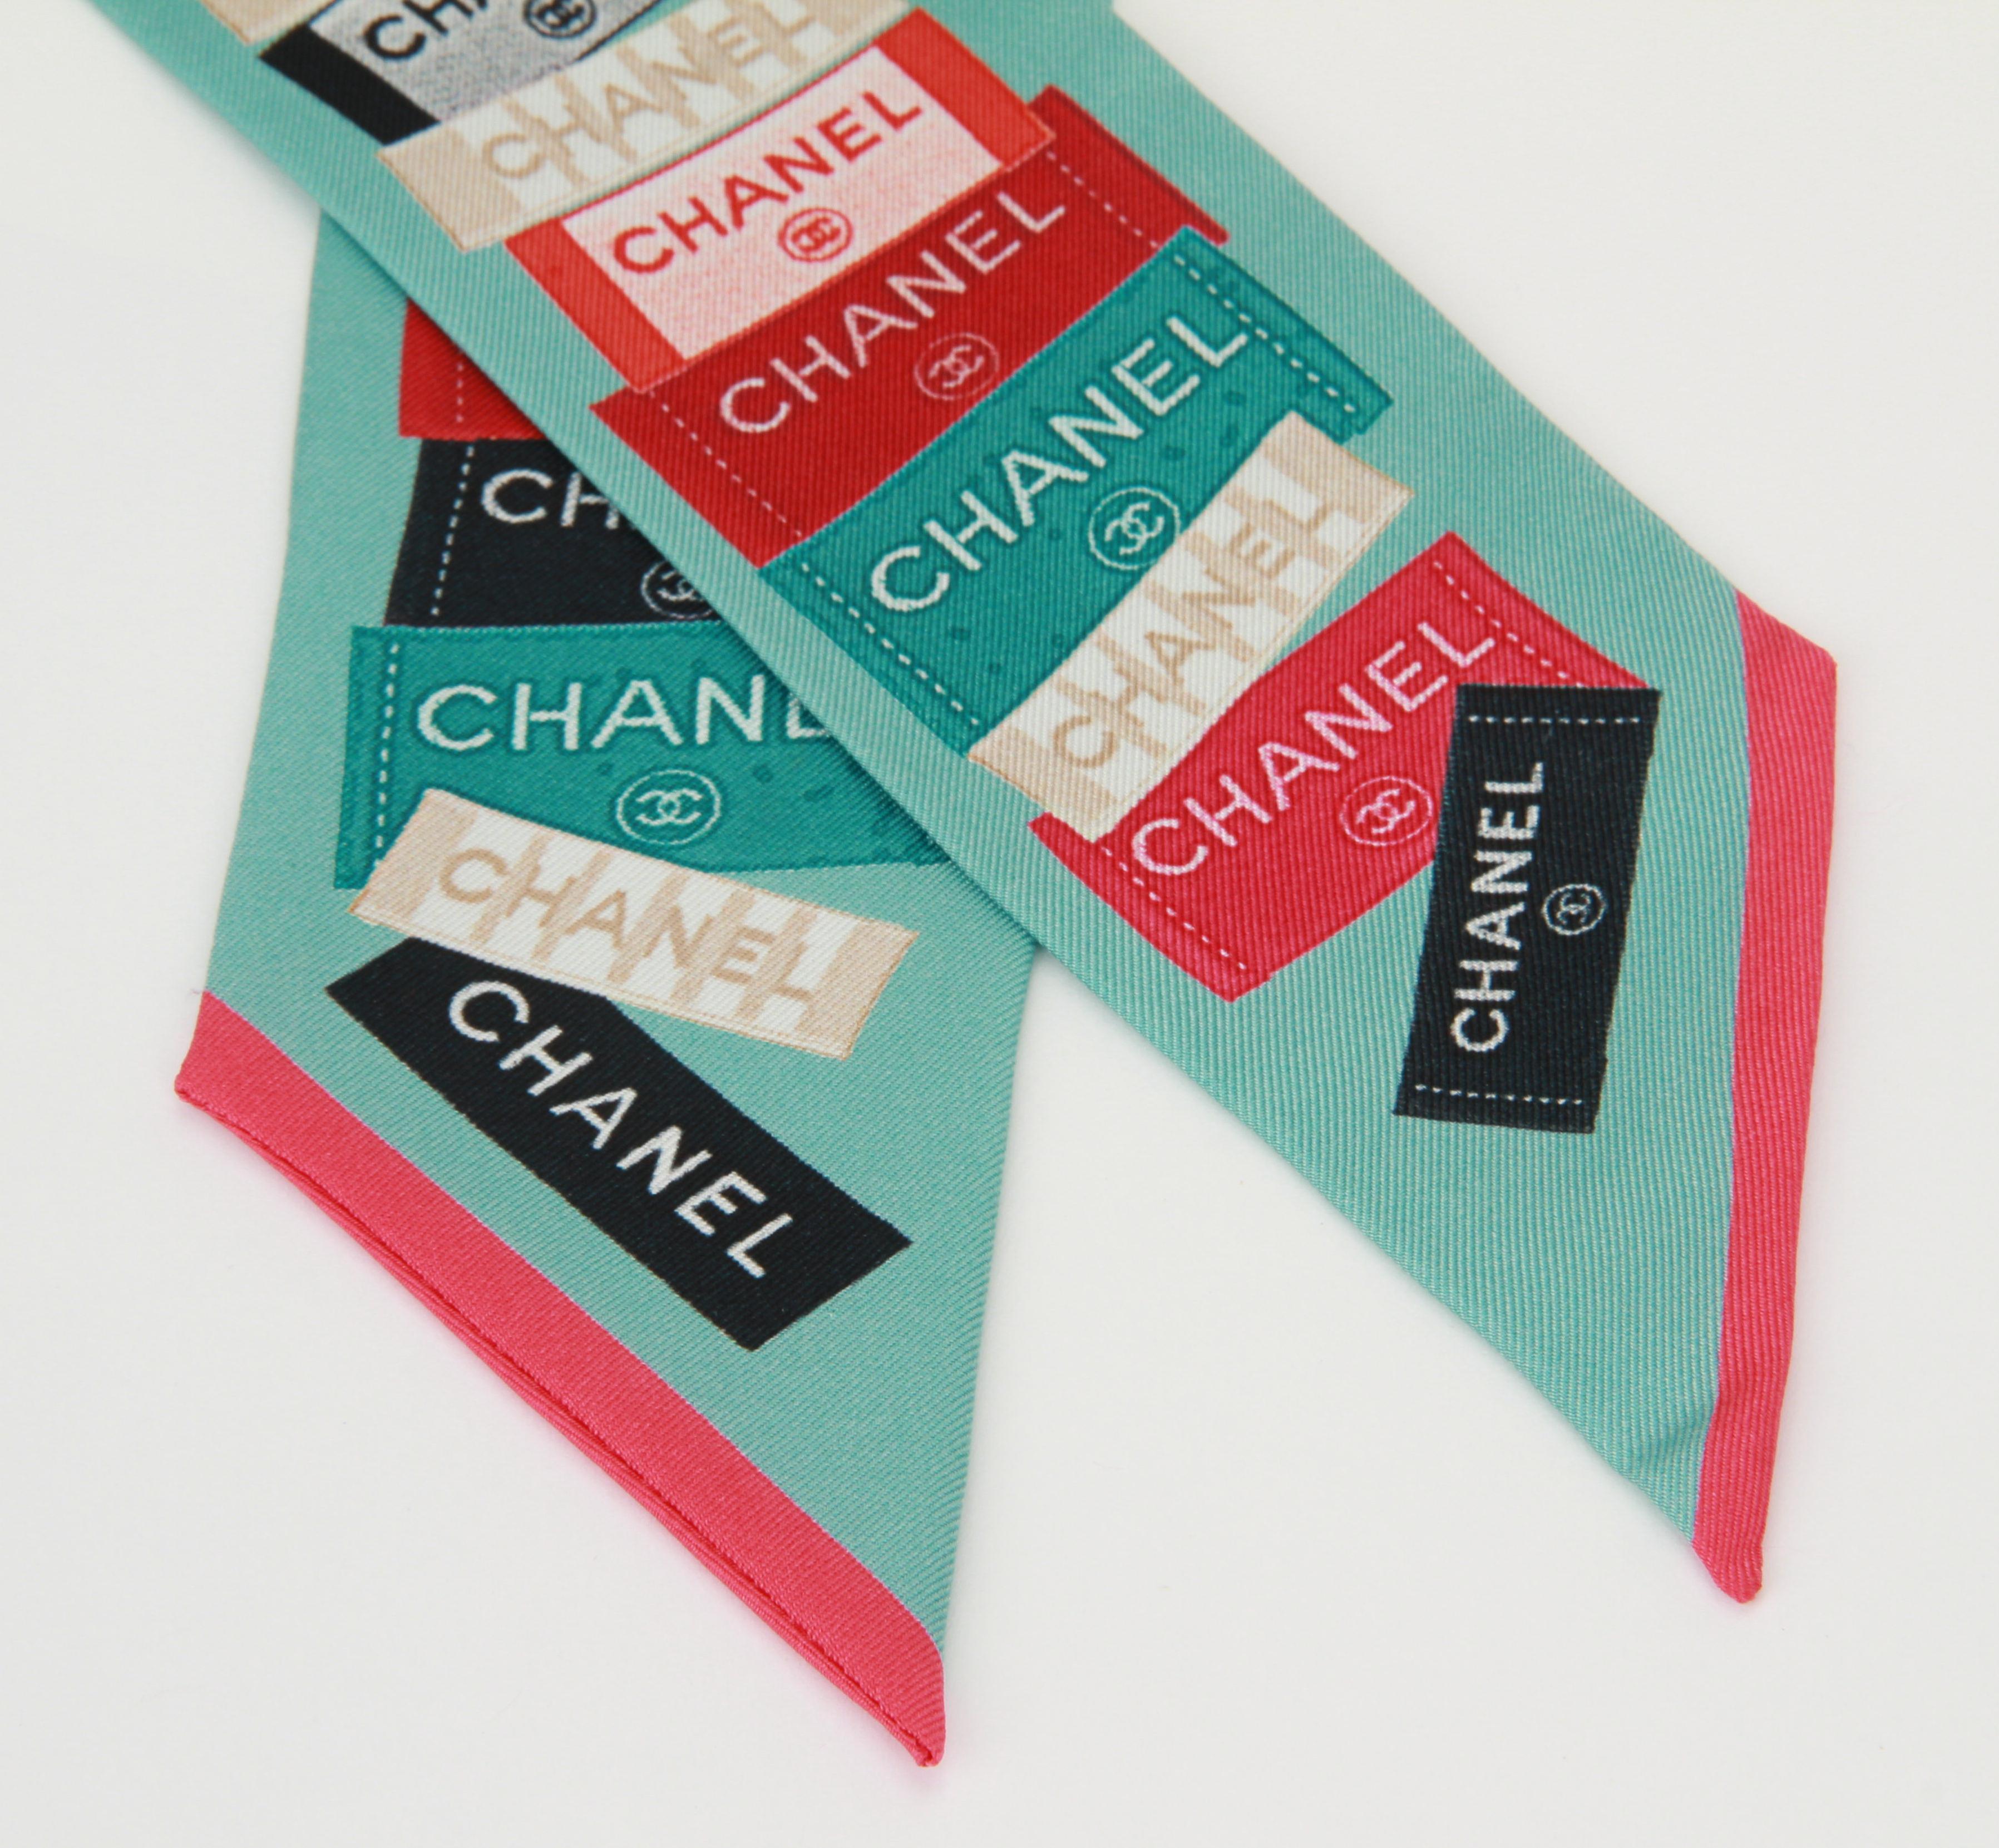 Chanel new aqua silk twilly with multicolor labels design. Missing label and tag.